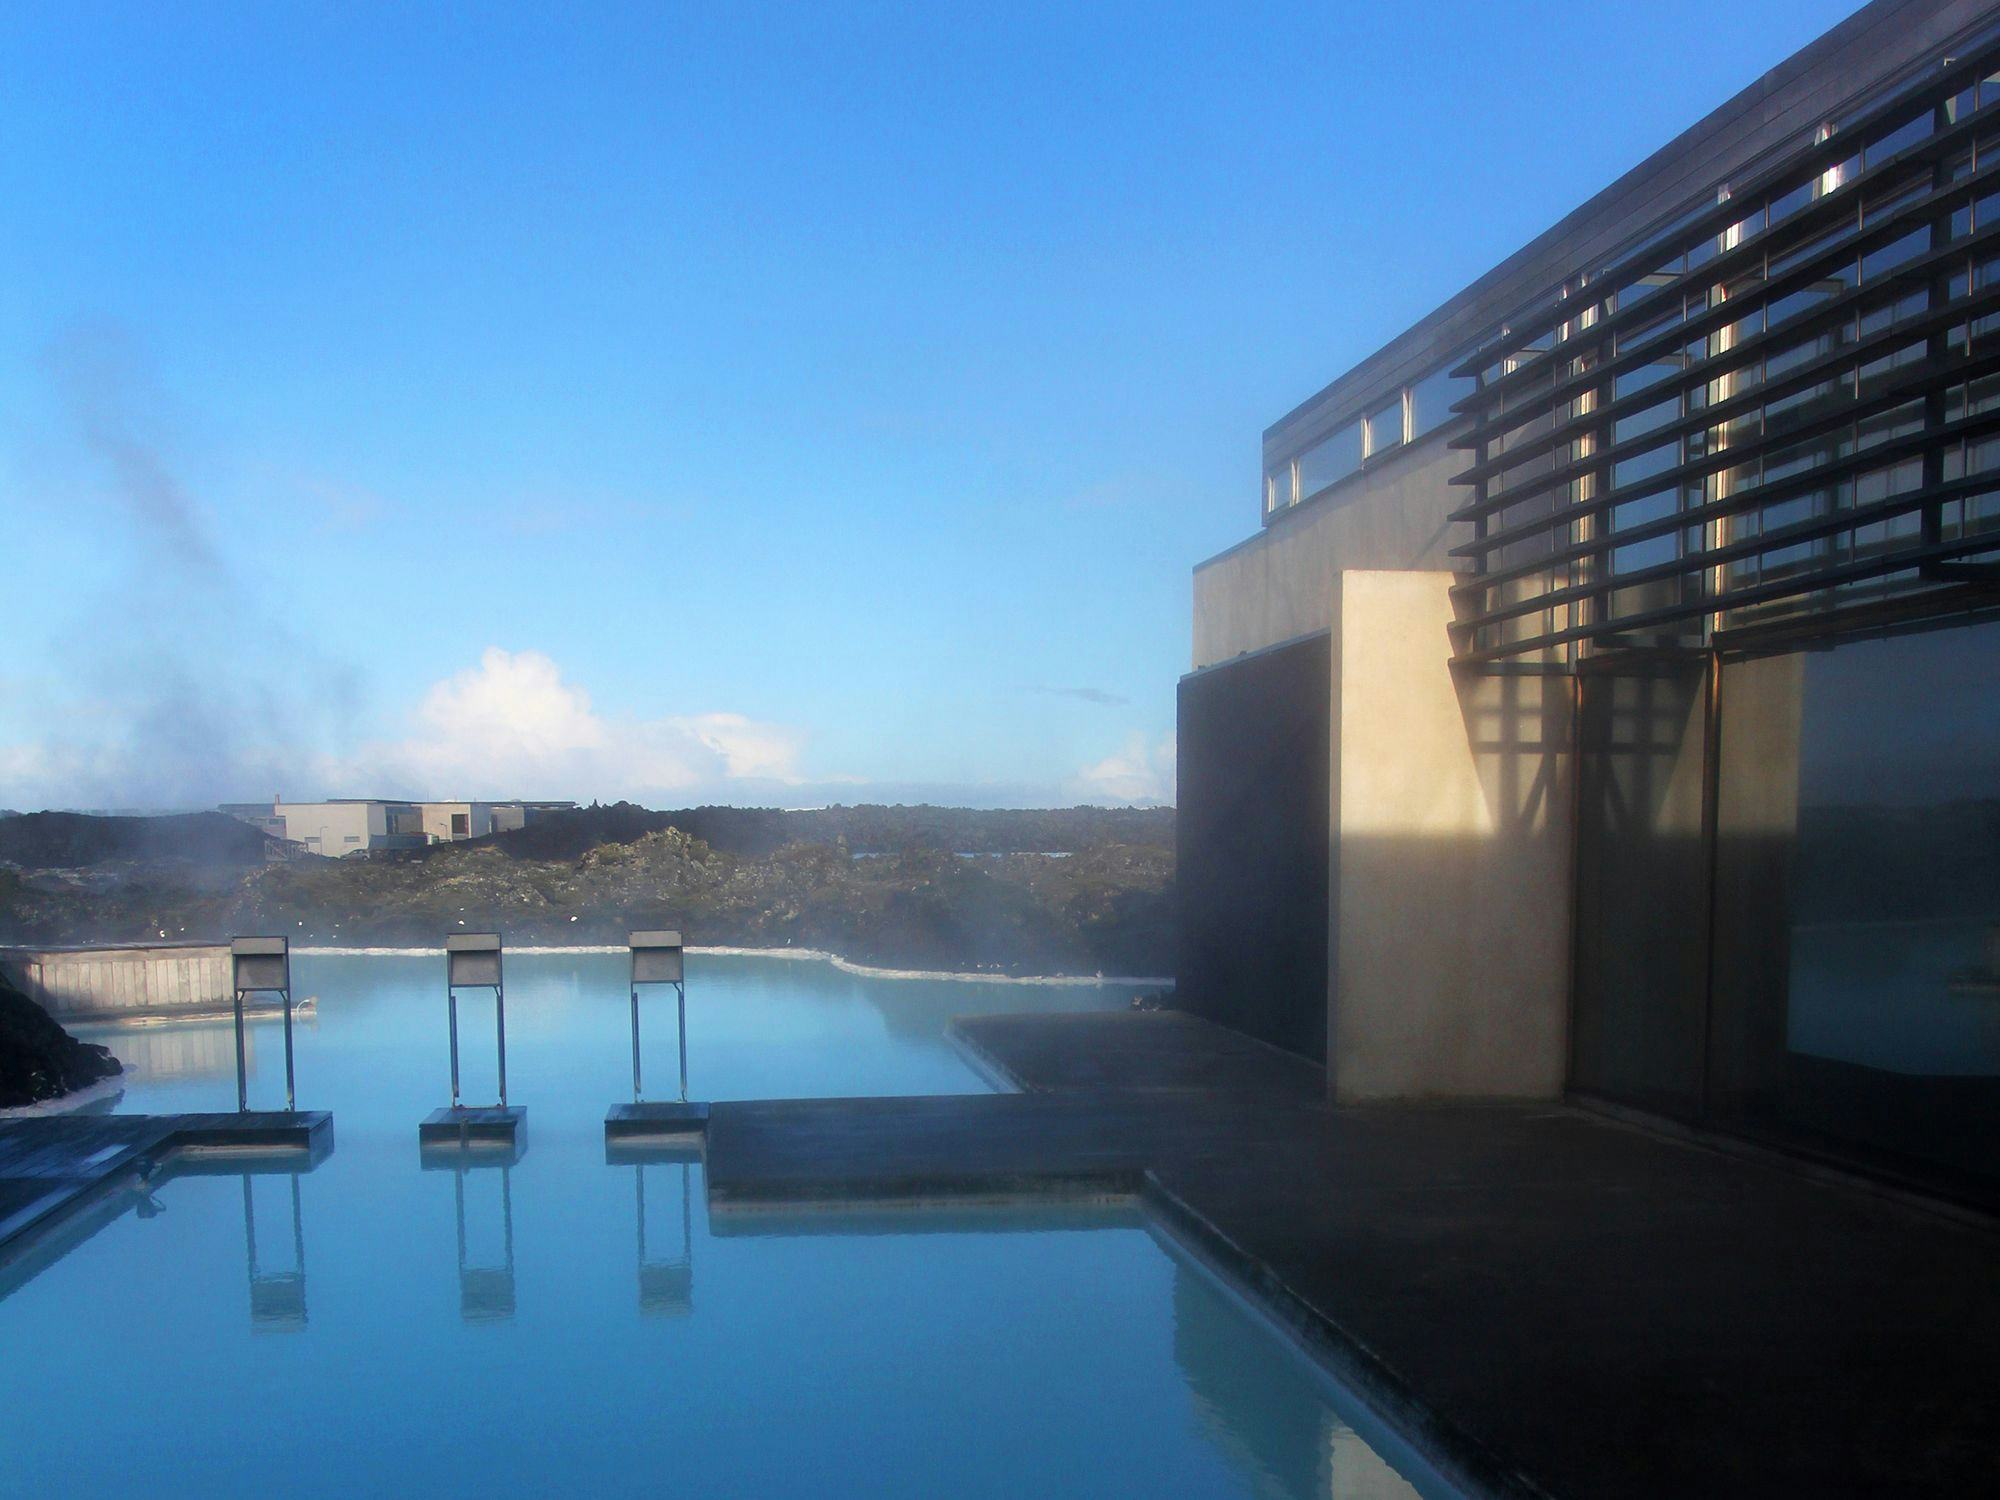 Blue geothermal pool next to a building